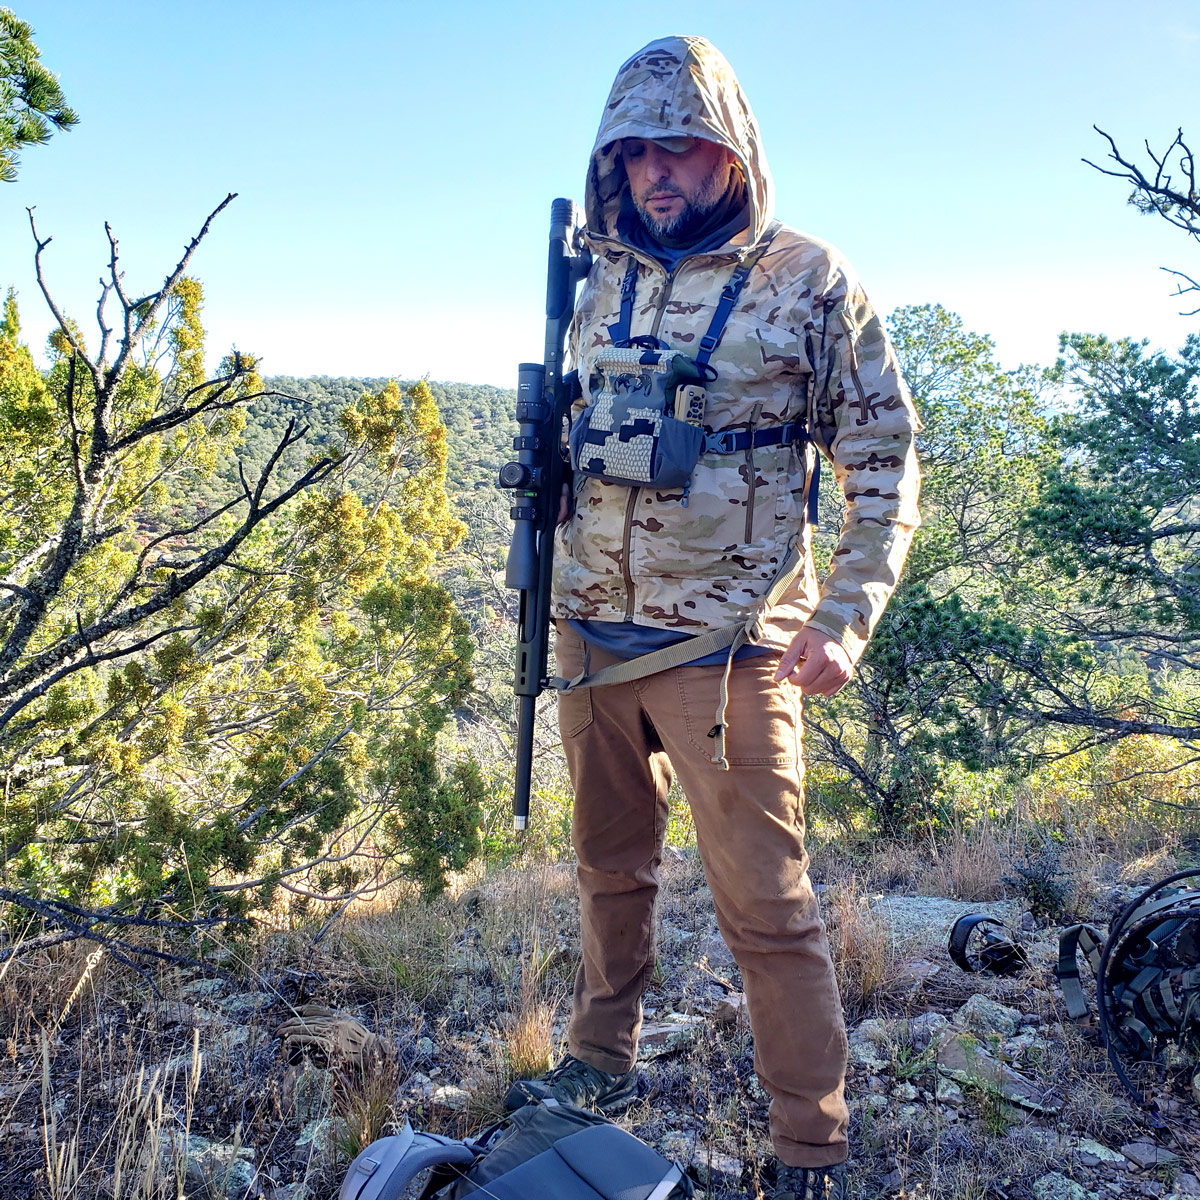 Layers, camouflage shell from First Spear, 5.11 pants, Solomon boots, waterproof binocular harness for my rangefinder, Kestrel 5700, and cell phone/OnX Hunt. Minutes after harvesting a New Mexico Mule Deer.